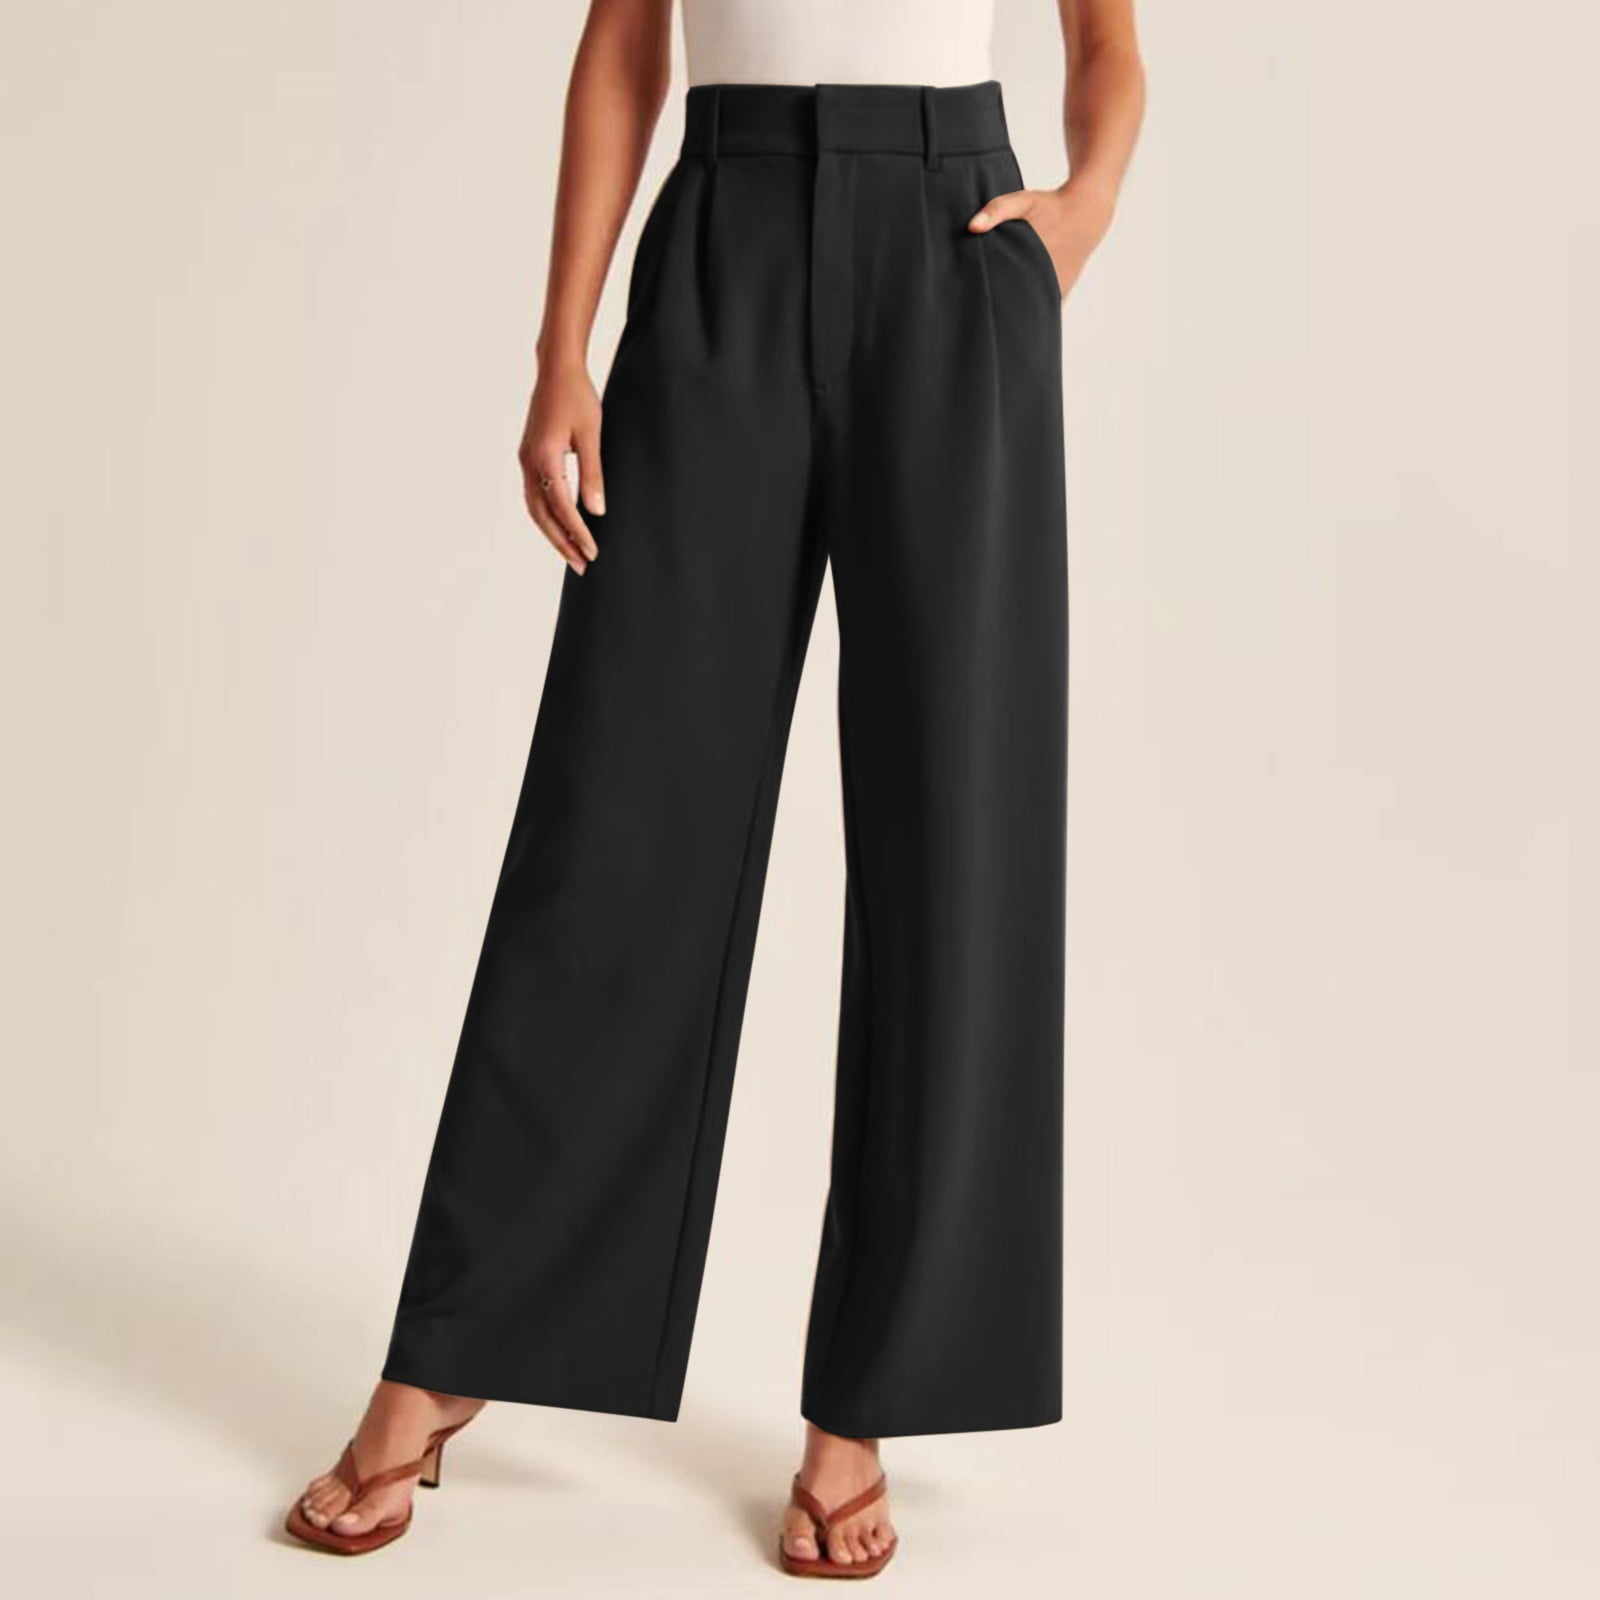 Women's Casual High Waisted Pants - Free People | ROOLEE